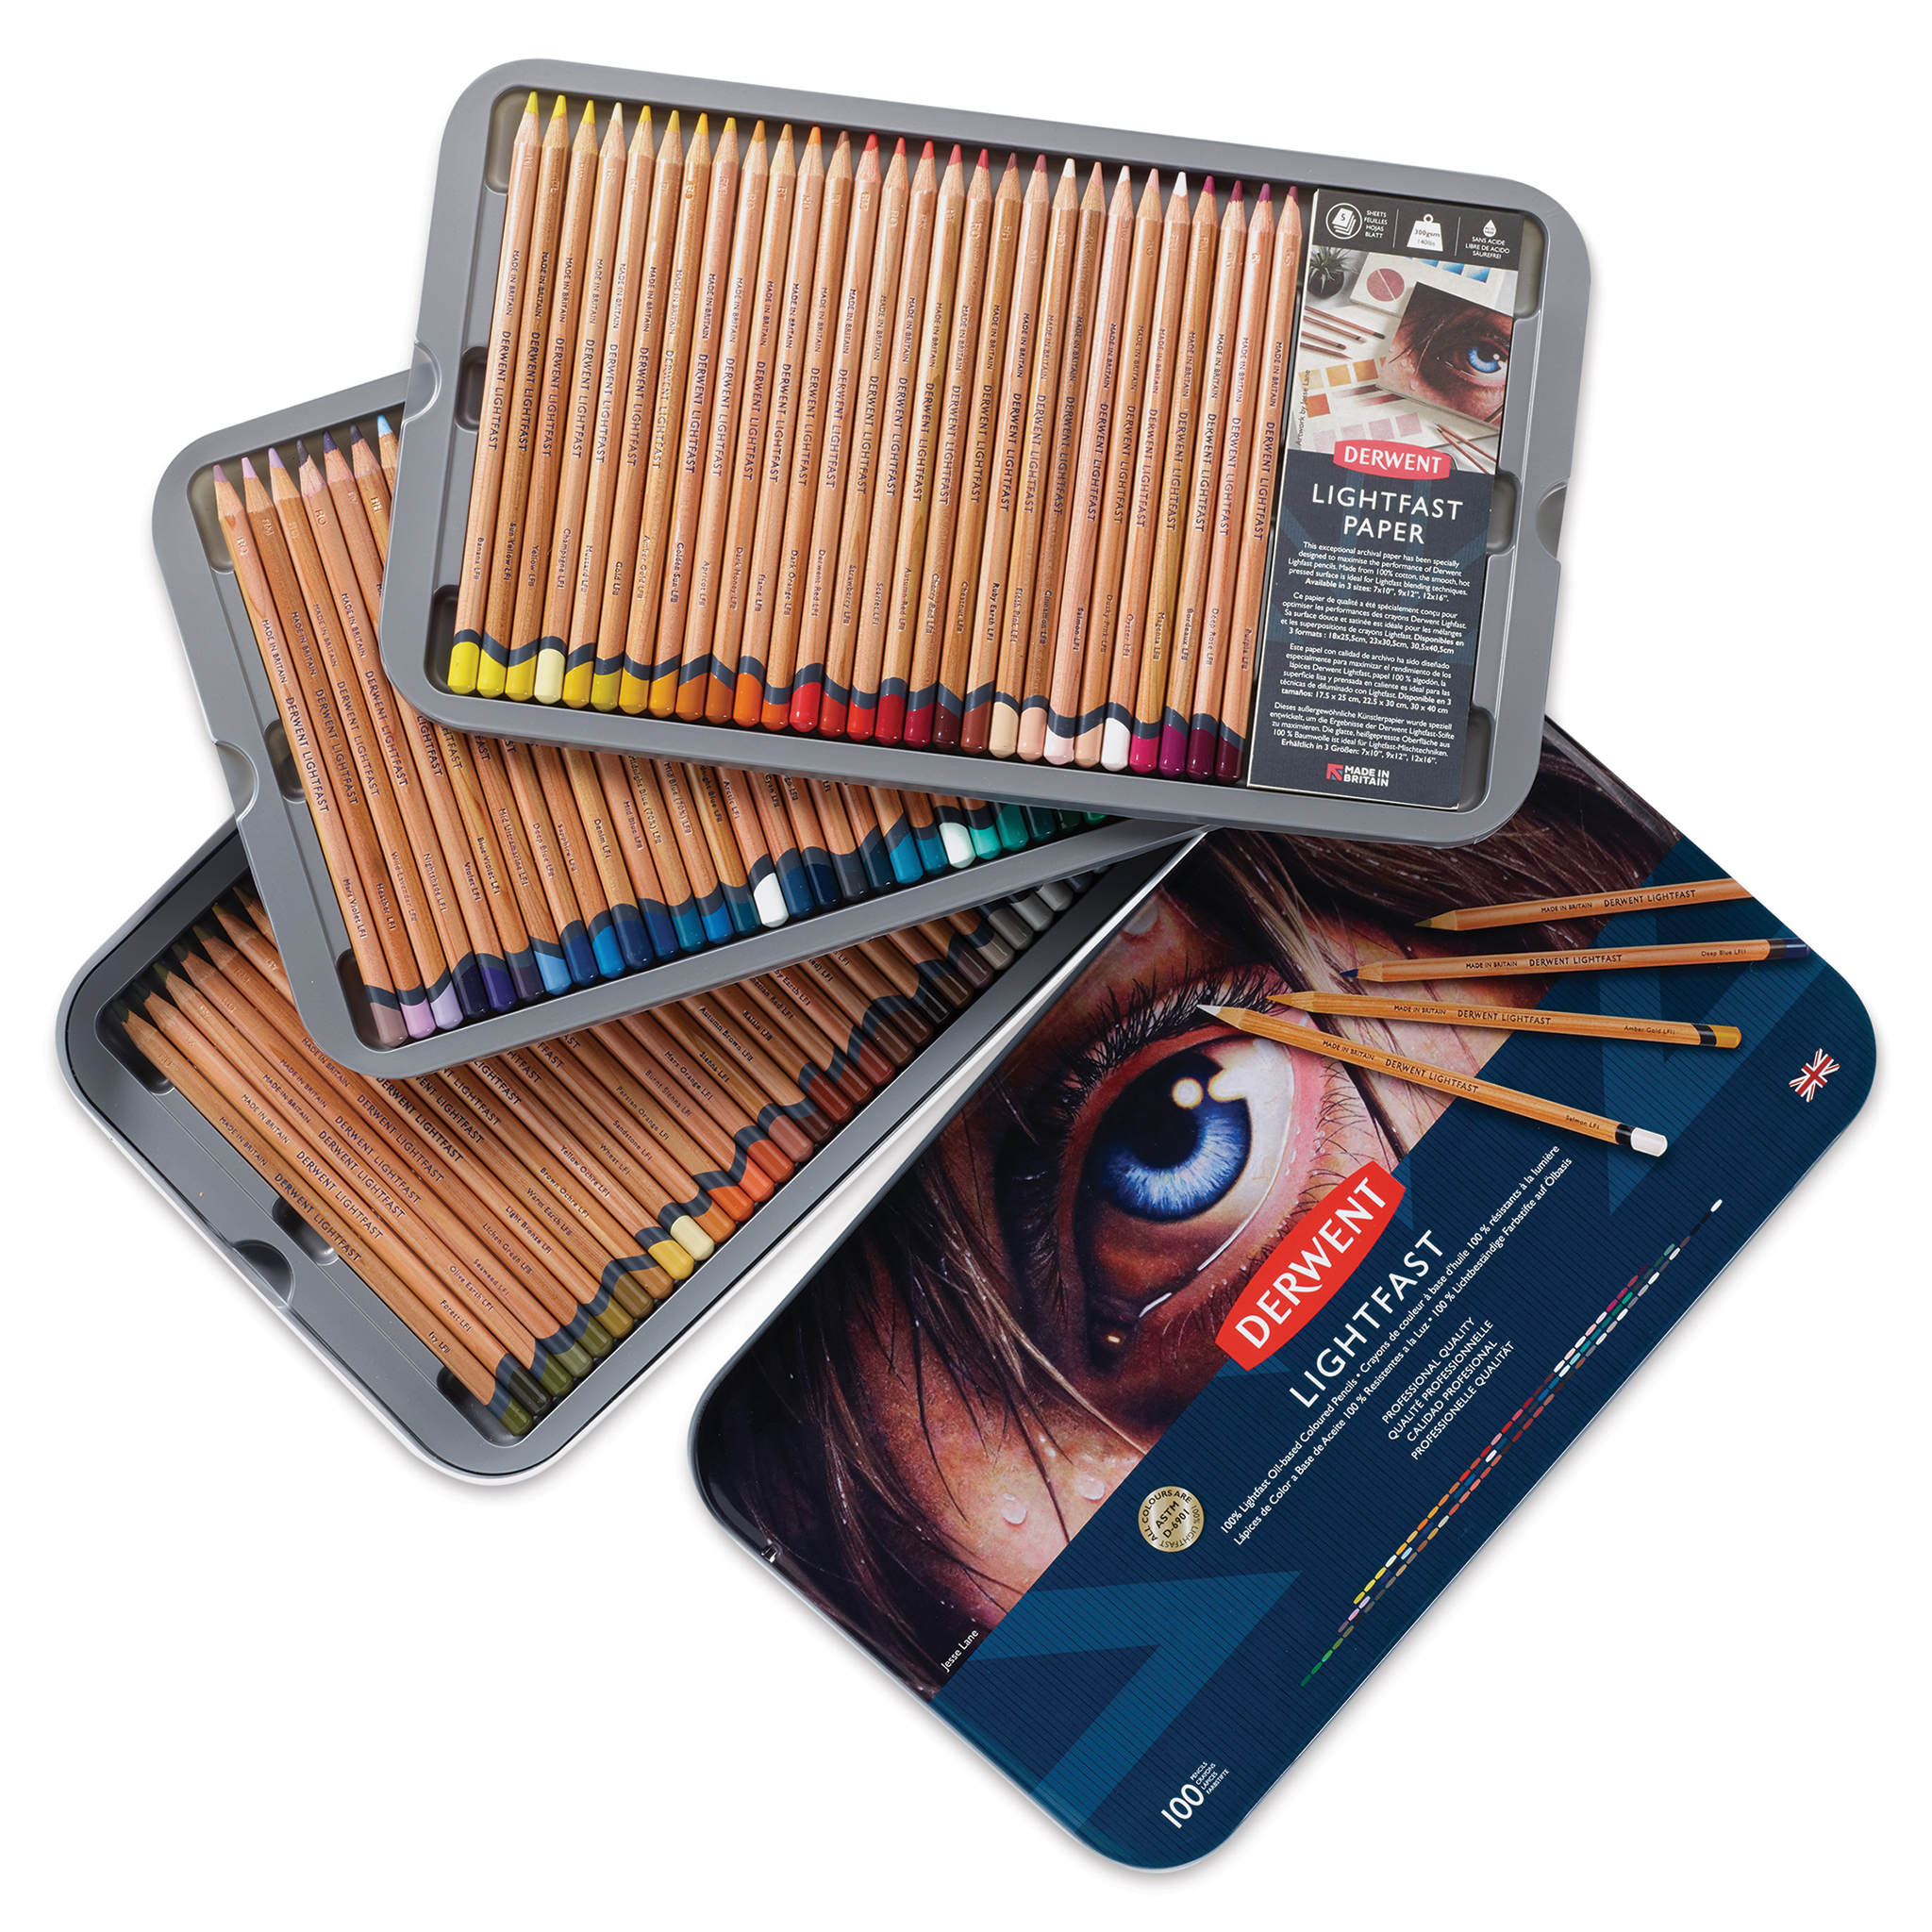  Derwent Lightfast Colored Pencils 24 Tin, Set of 24, 4mm Wide  Core, 100% Lightfast, Oil-based, Premium Core, Creamy, Ideal for Drawing,  Coloring, Professional Quality (2302720) : Arts, Crafts & Sewing